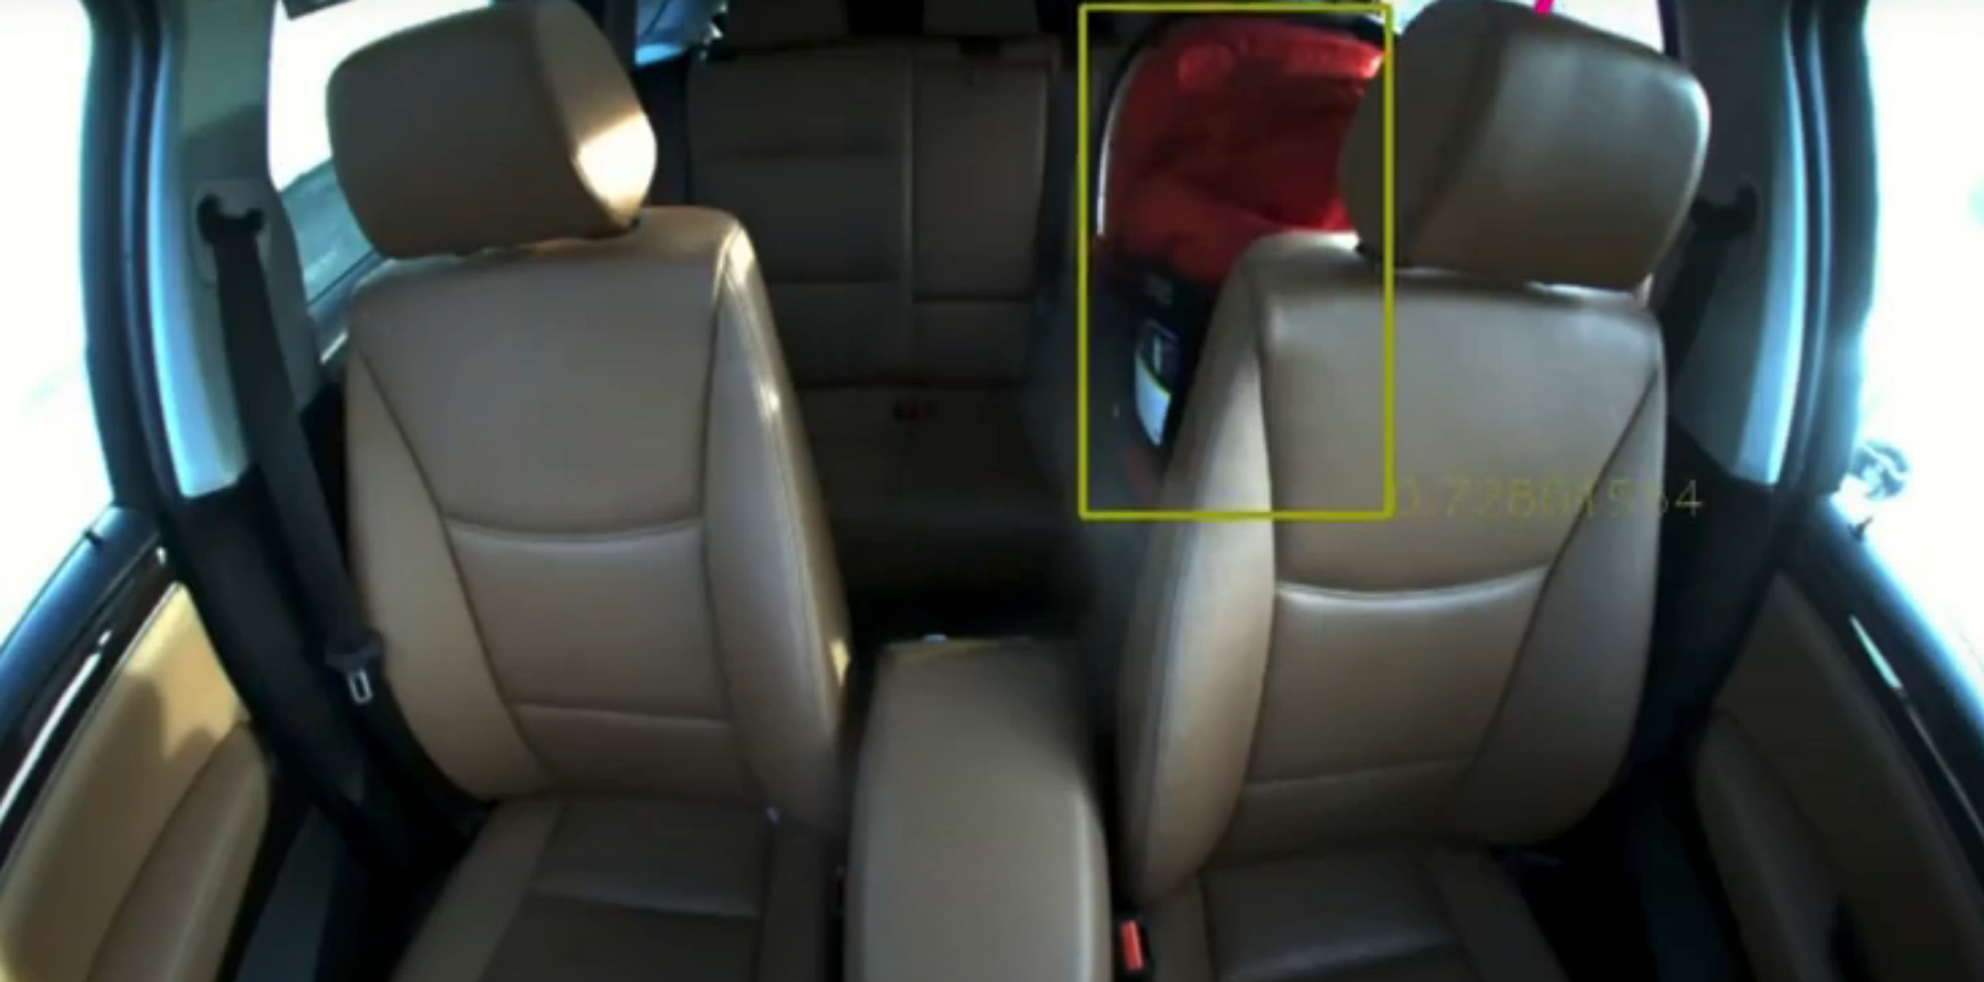 A photo of an inside of a car with a yellow square around a car seat in the back.